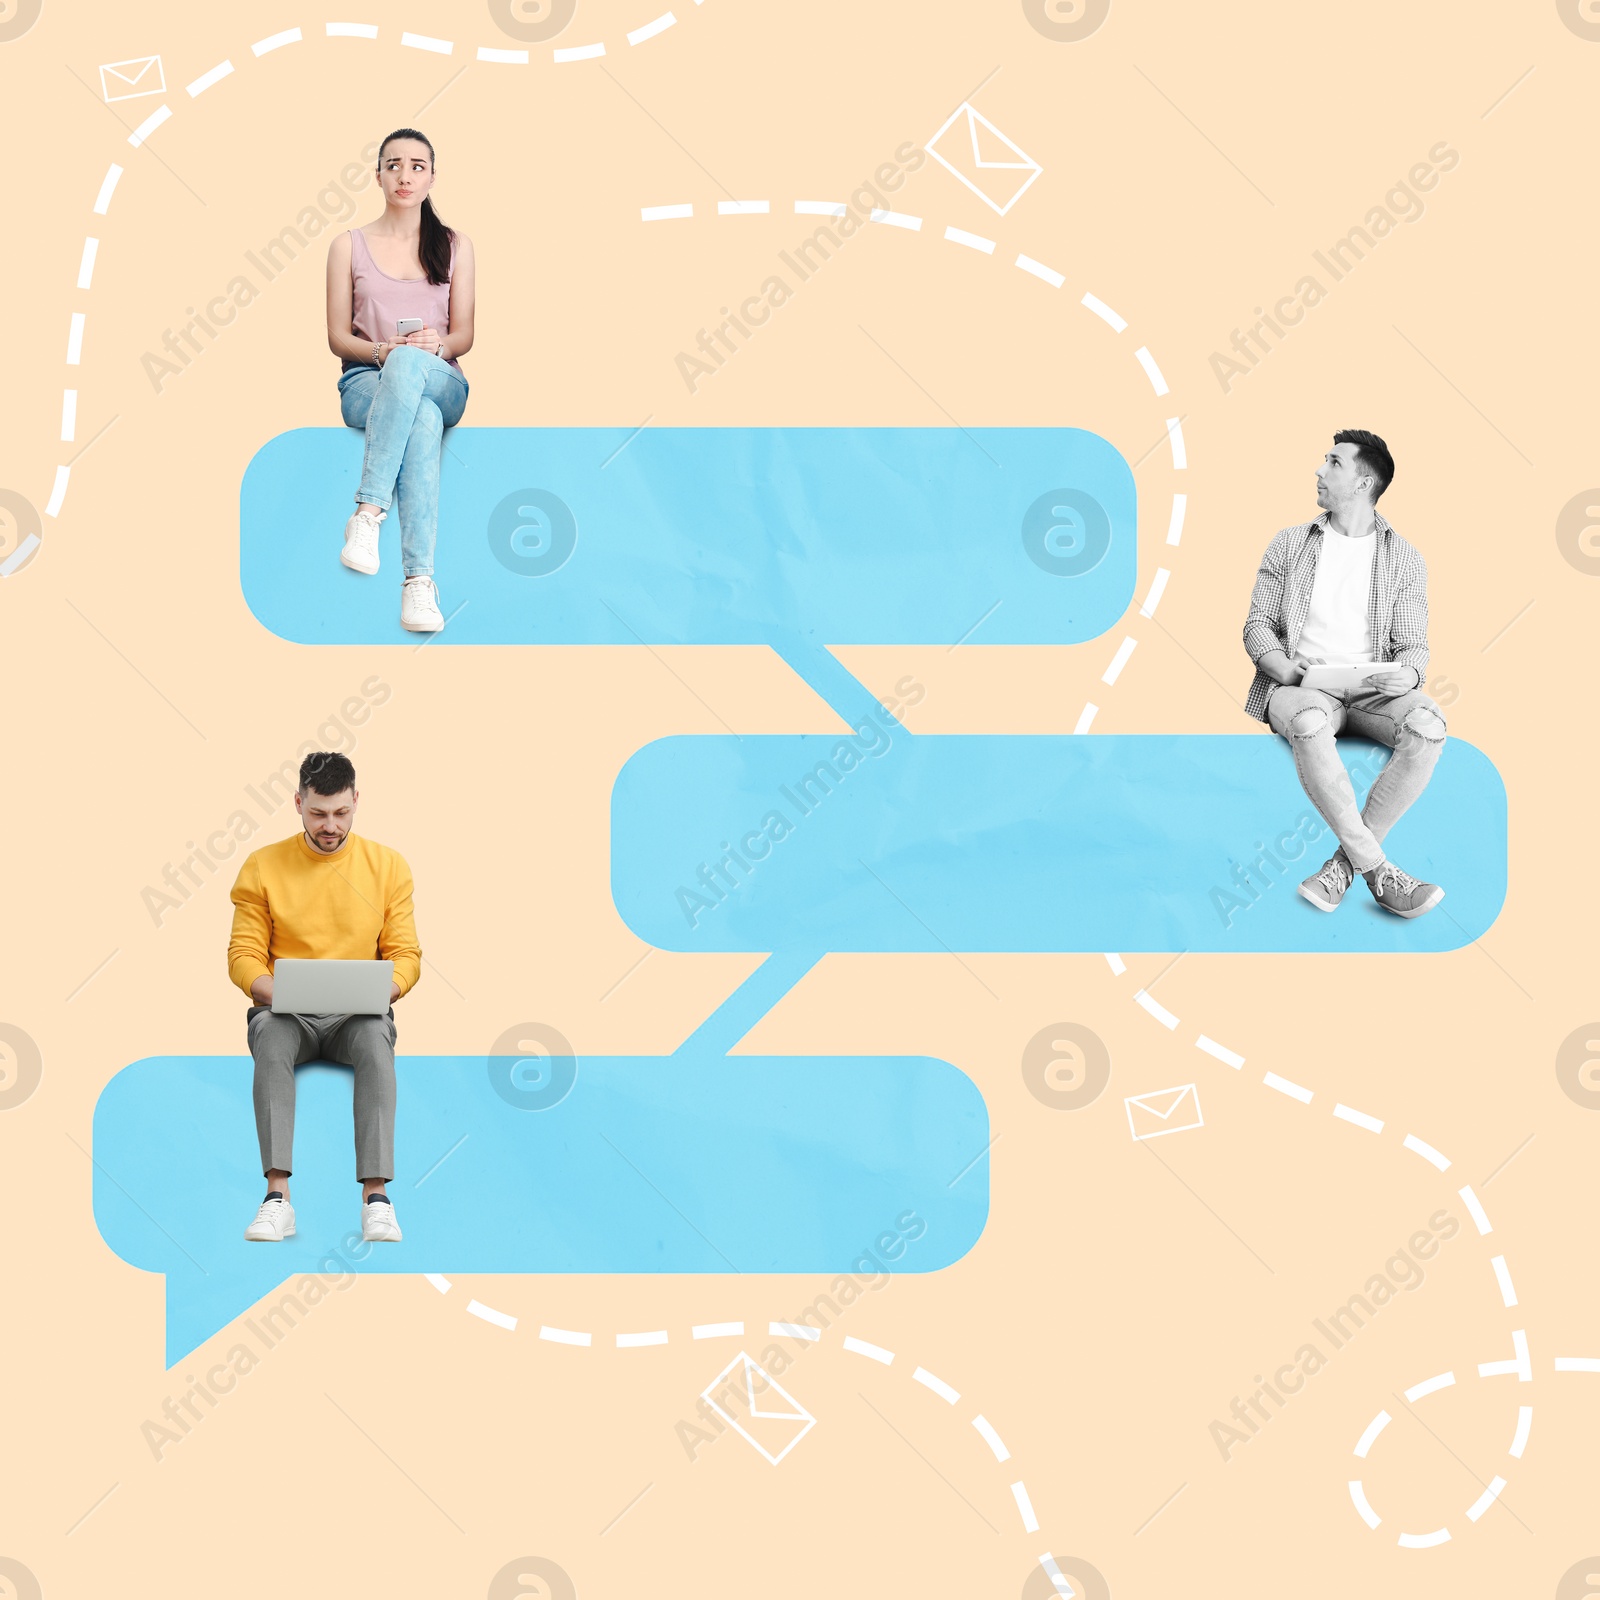 Image of Dialogue. Woman and men sitting on connected speech bubble against color background